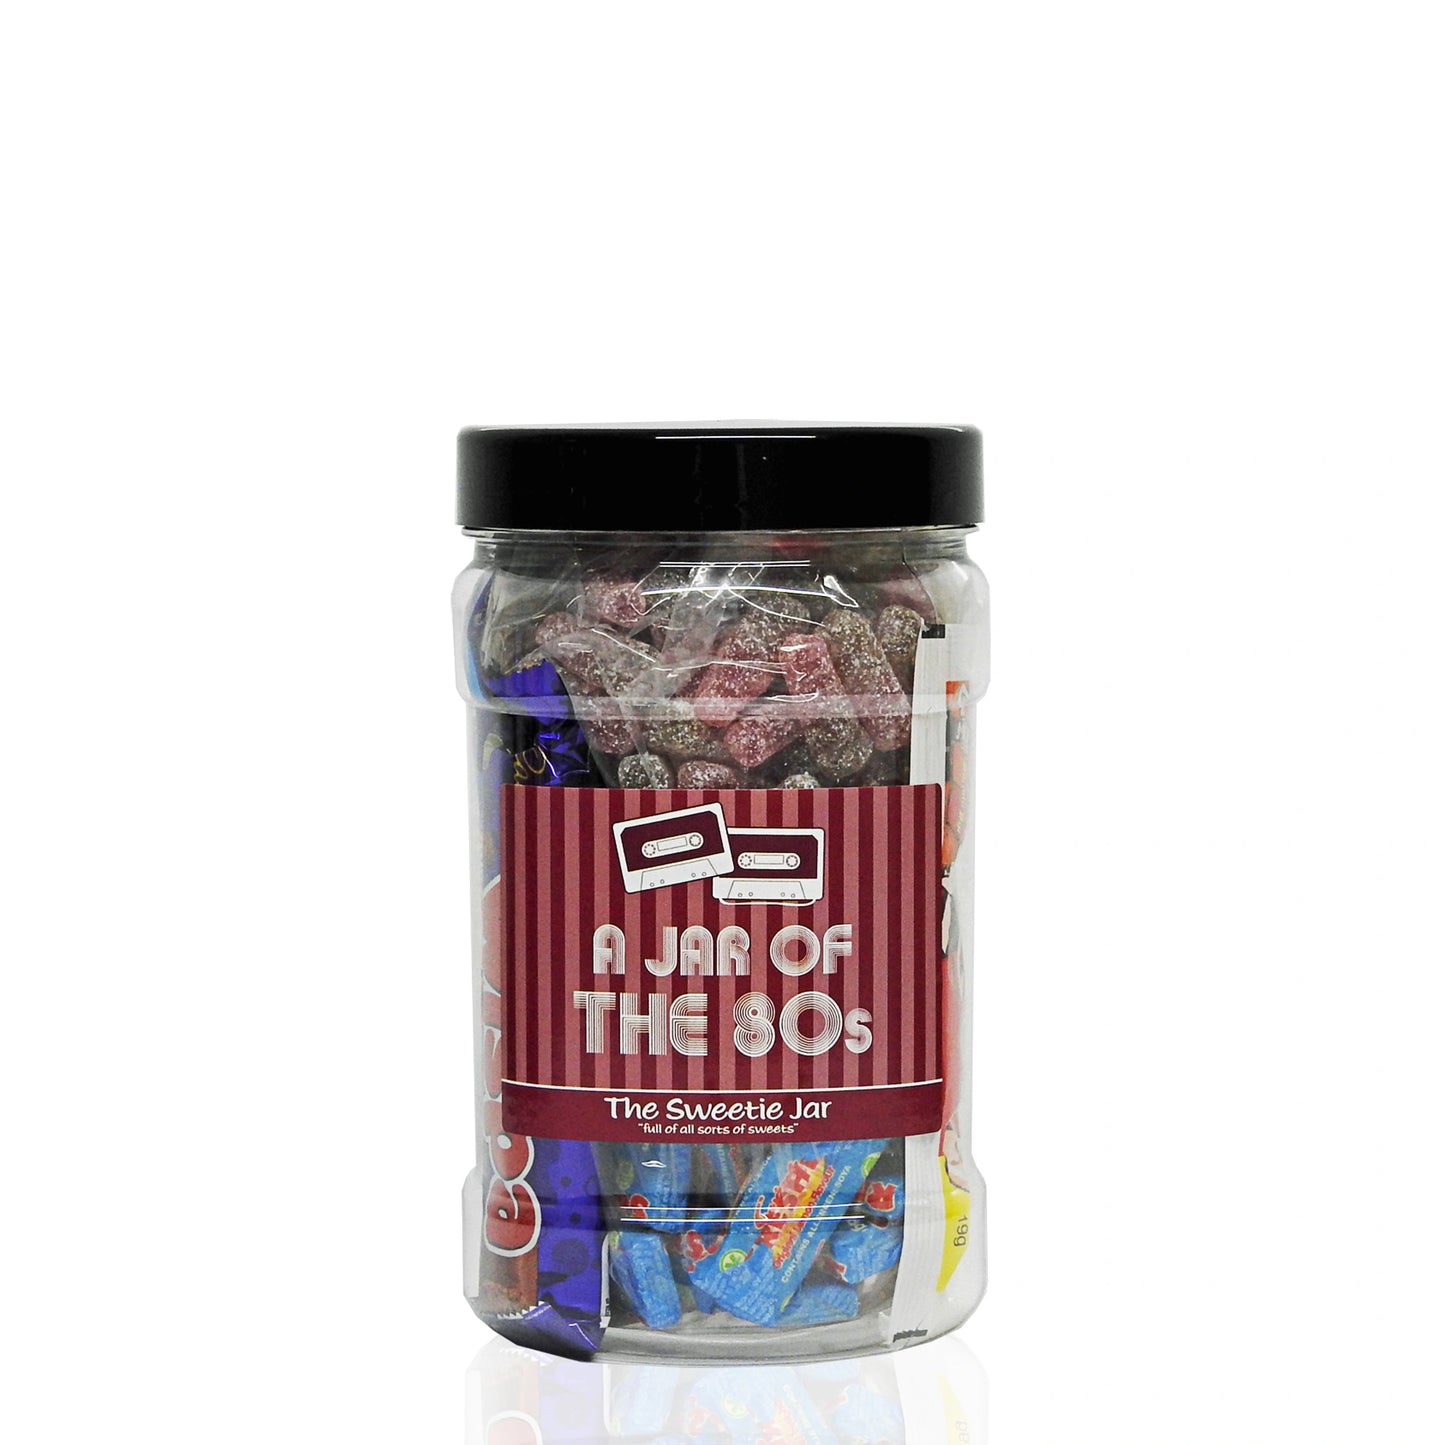 A Small Sweet Jar of 80s Sweets - Full of Retro Sweets you'll remember from the 80s decade